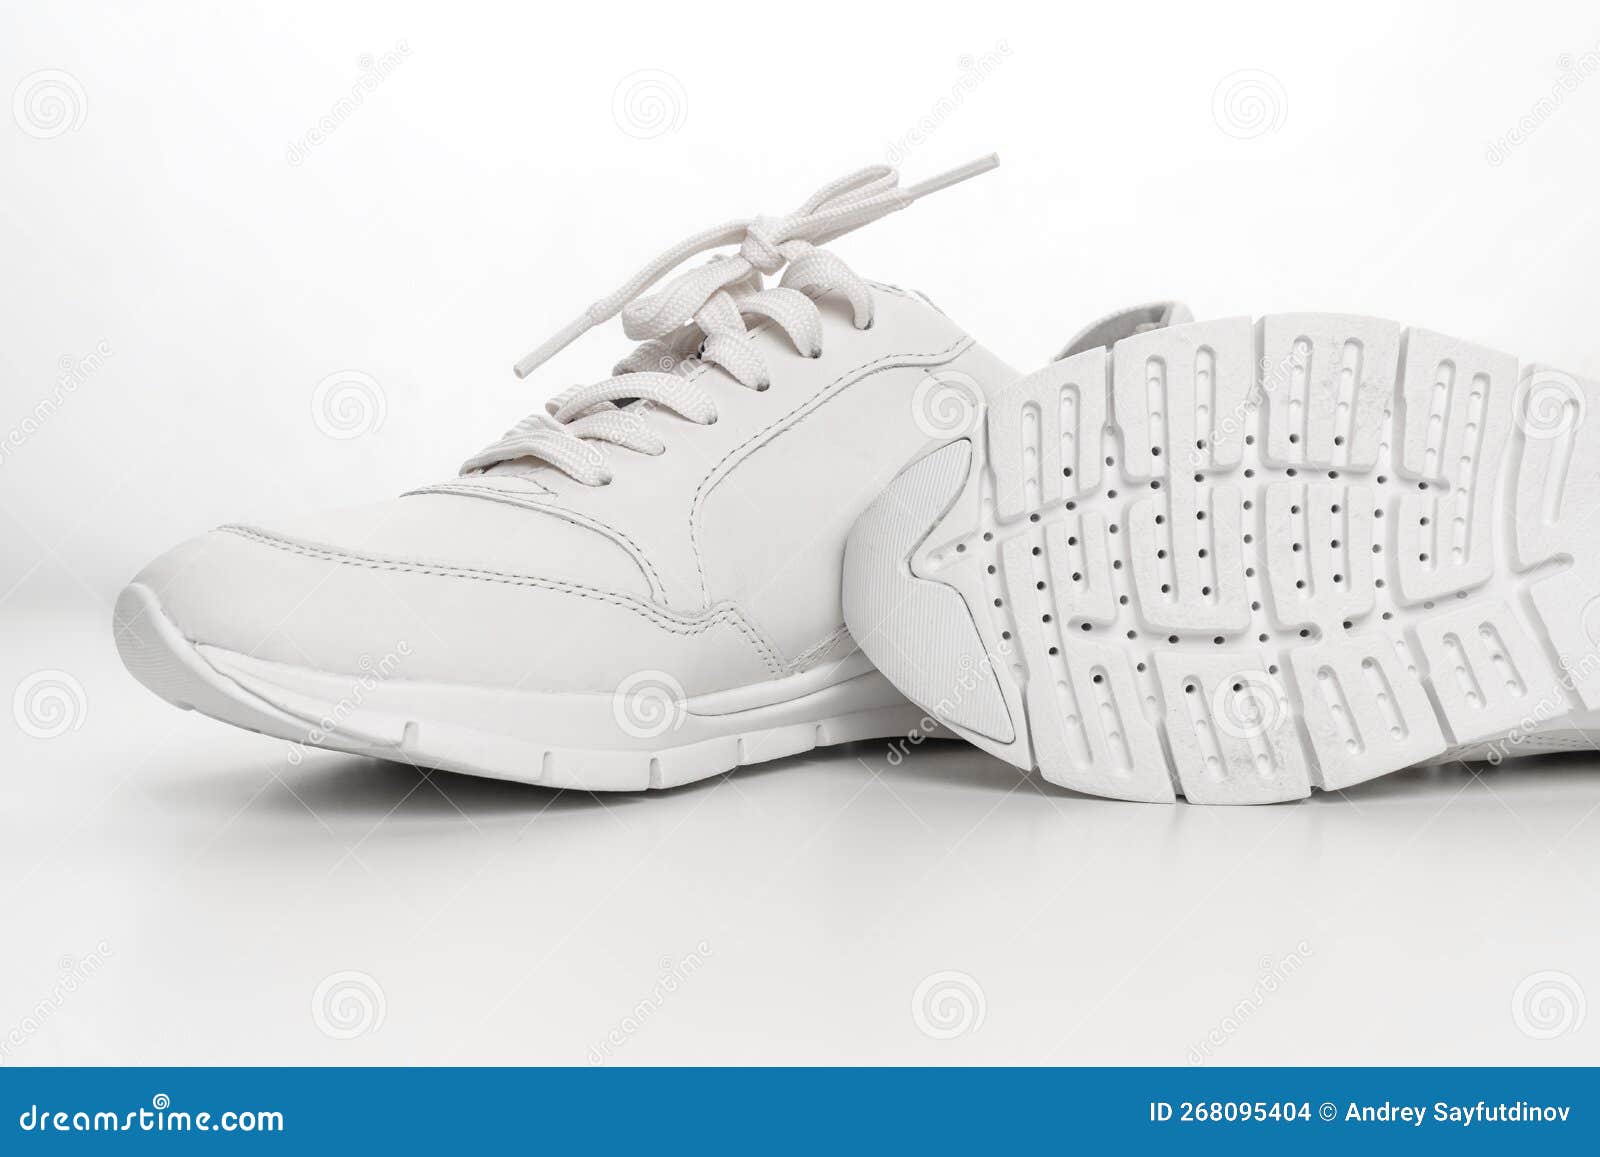 Leather Sneakers with Lacing and Perforated Sole on a White Background ...